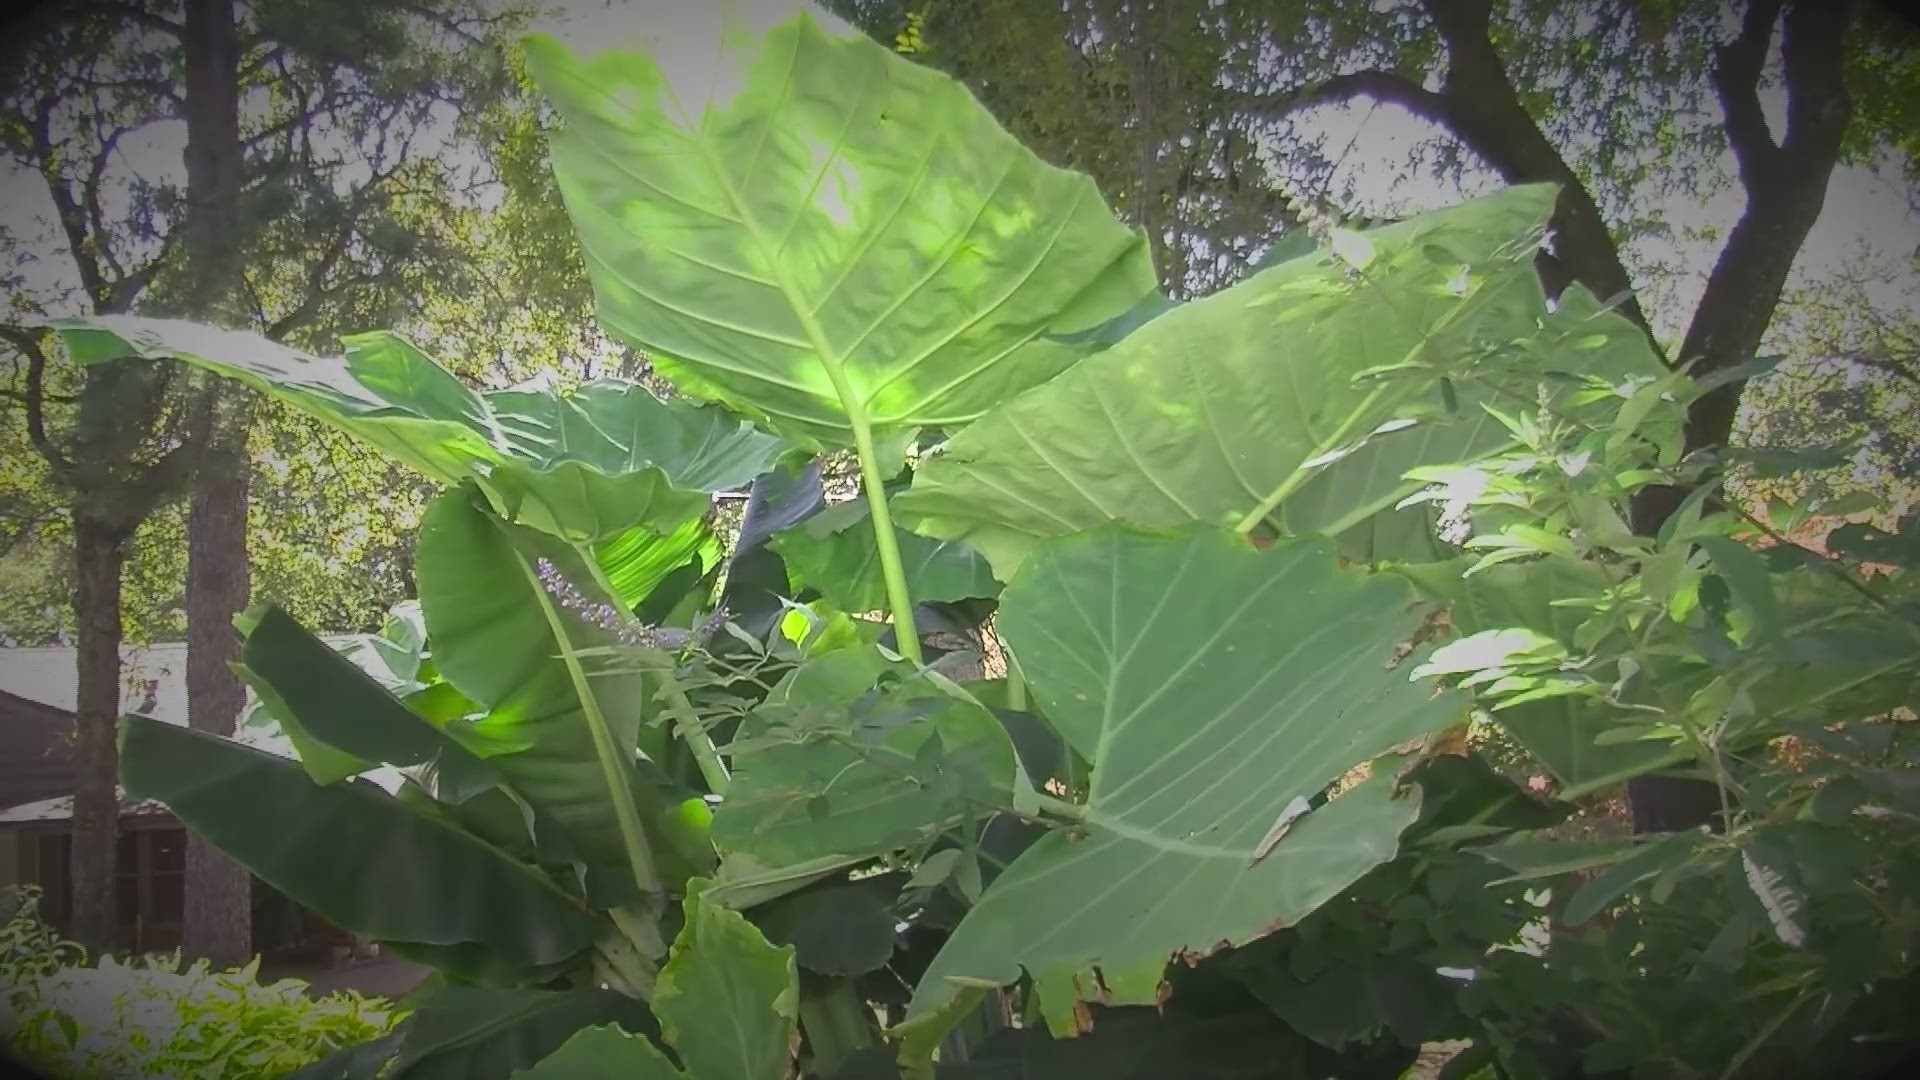 Chris H. Olsen talks about spicing up your yards with big foliage.